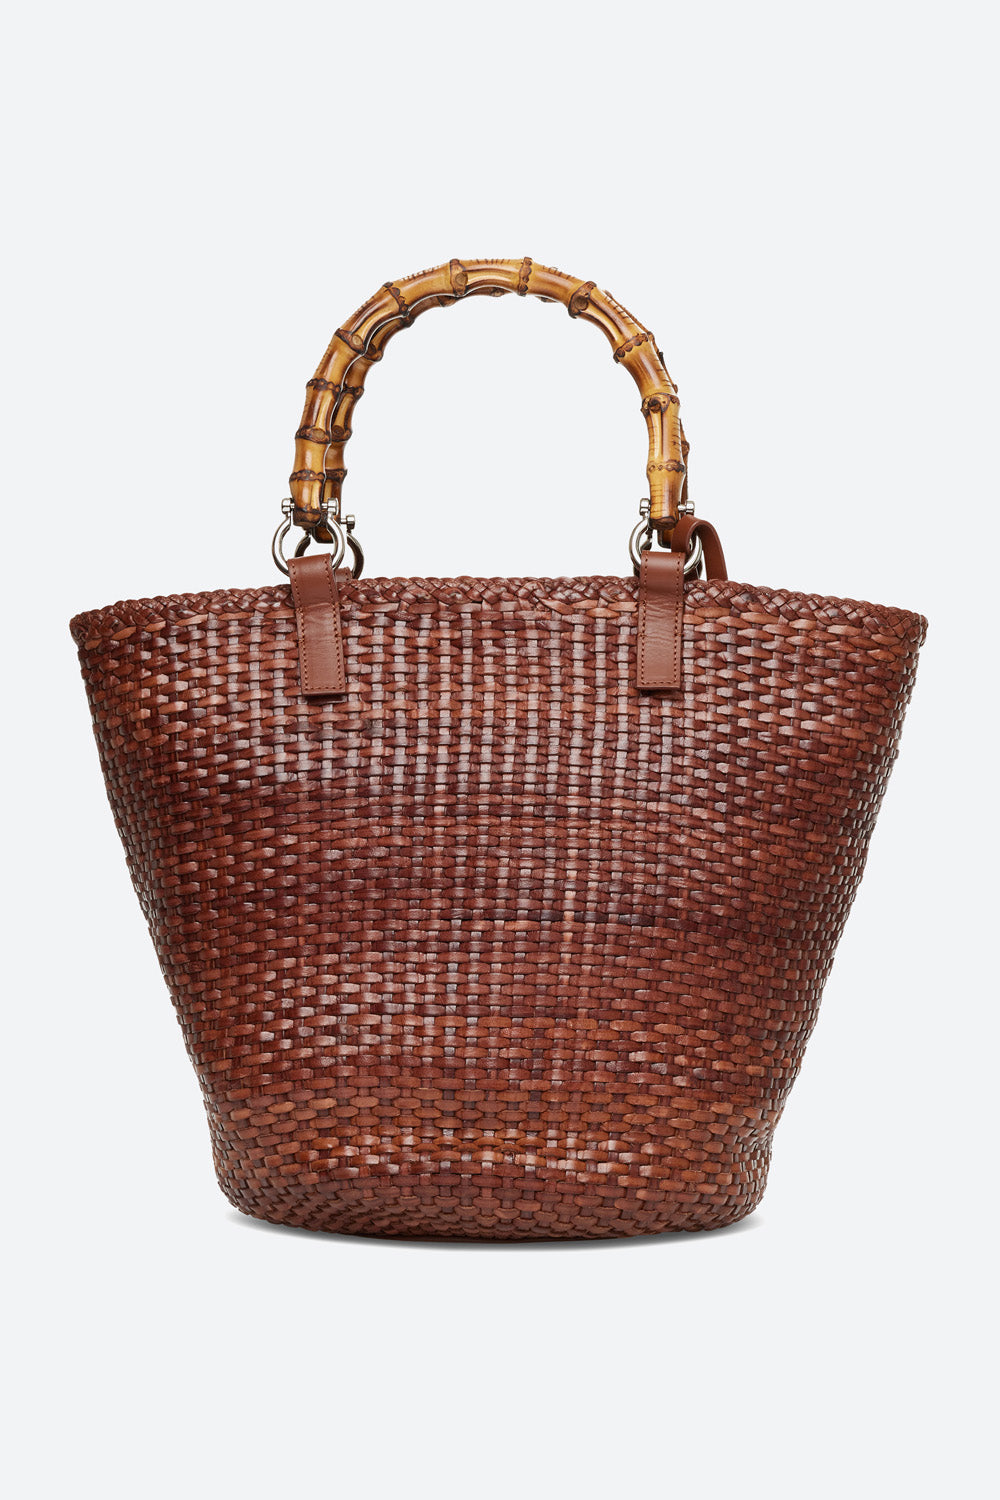 CoCopeaunts Summer Weave Womens Shoulder Bag Luxury Leather Tote Bag New  All Match Design Handbags New Female Simple Woven Beach Bags - Walmart.com